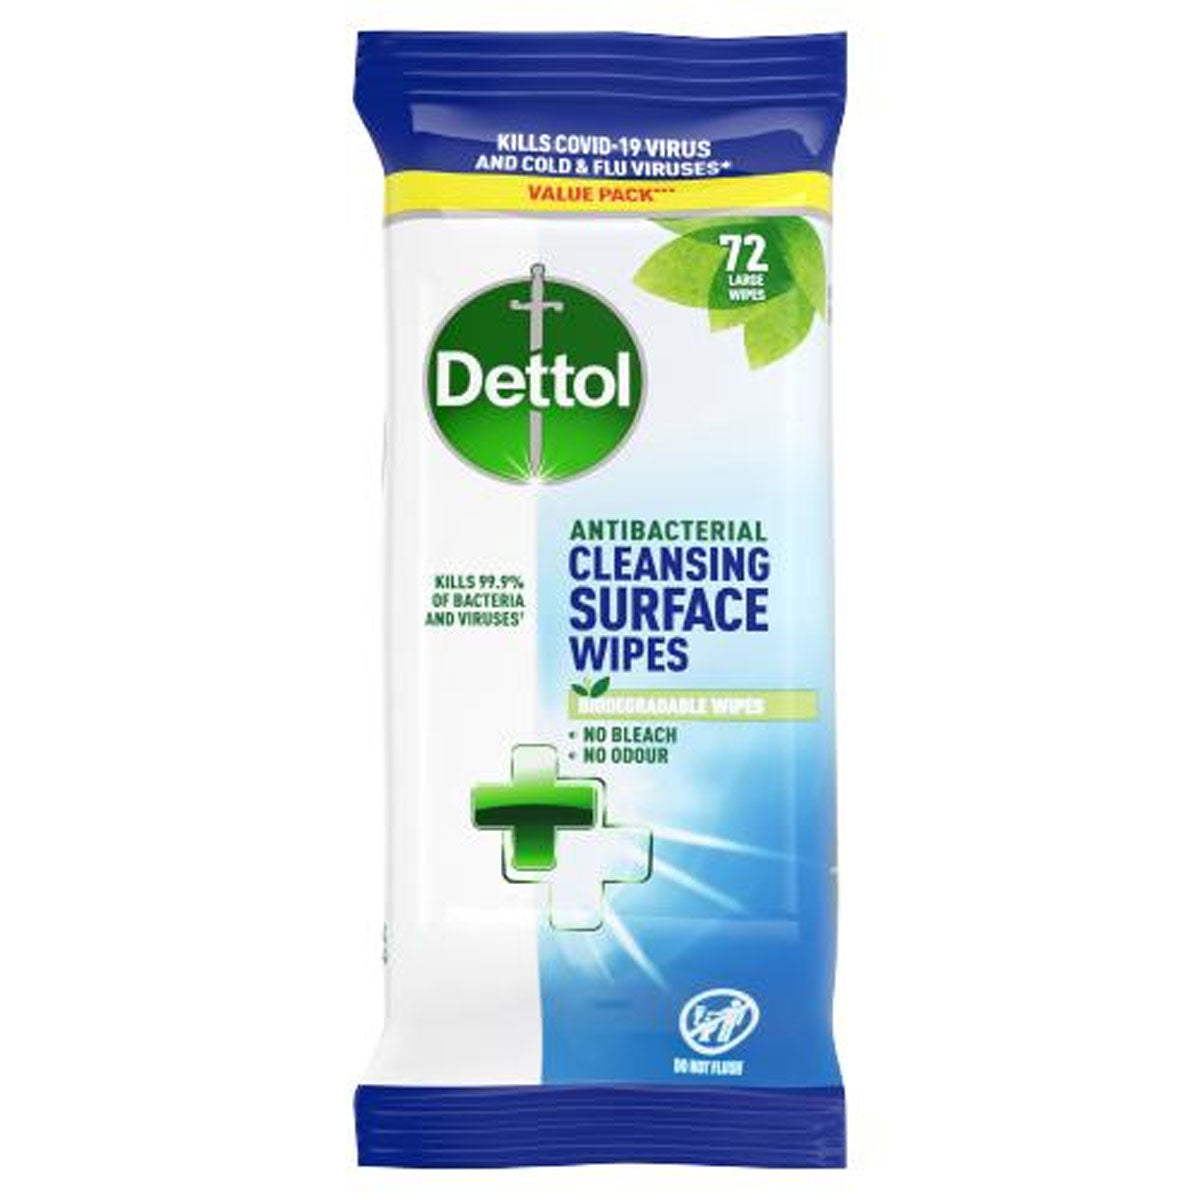 Dettol - Antibacterial Cleansing Surface Wipes - 72 Large Wipes.